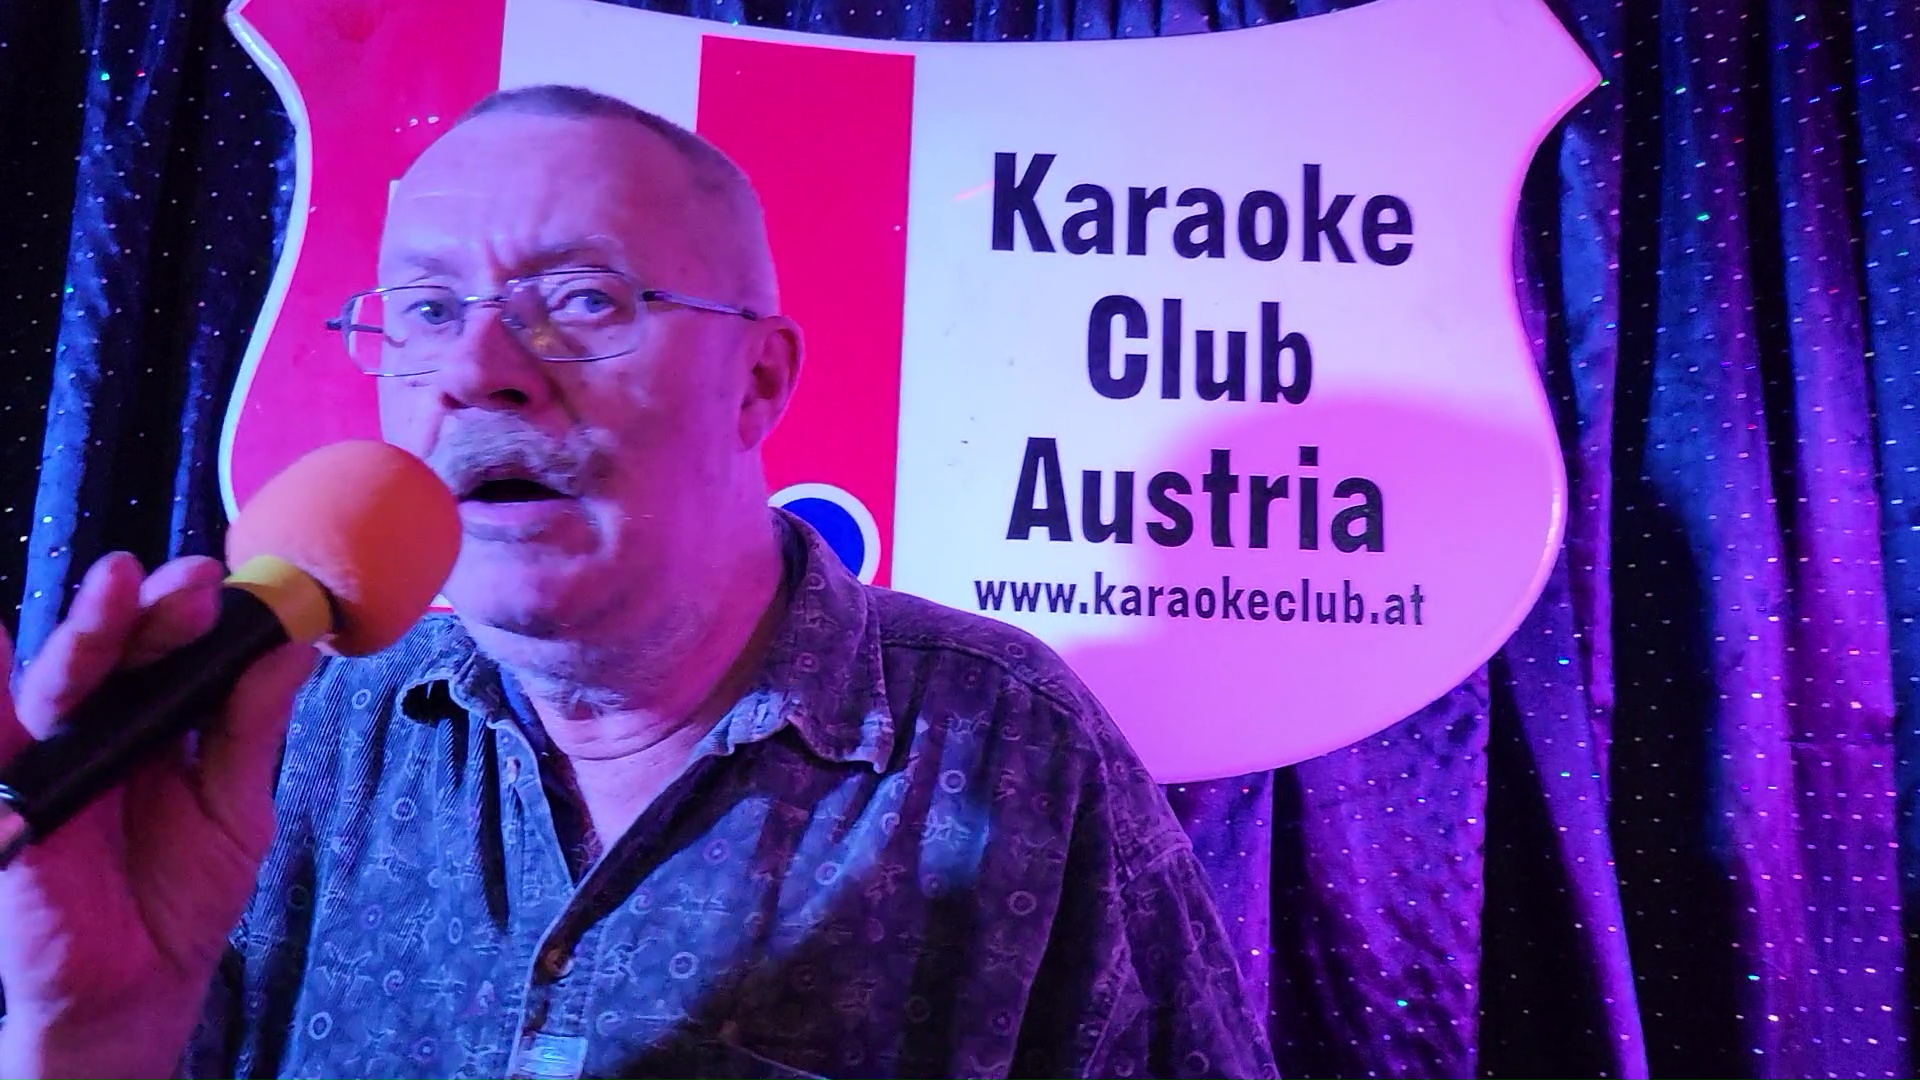 /https://www.1cms.at/clientdata/karaokeclub/club_content//wolfgang.jpg